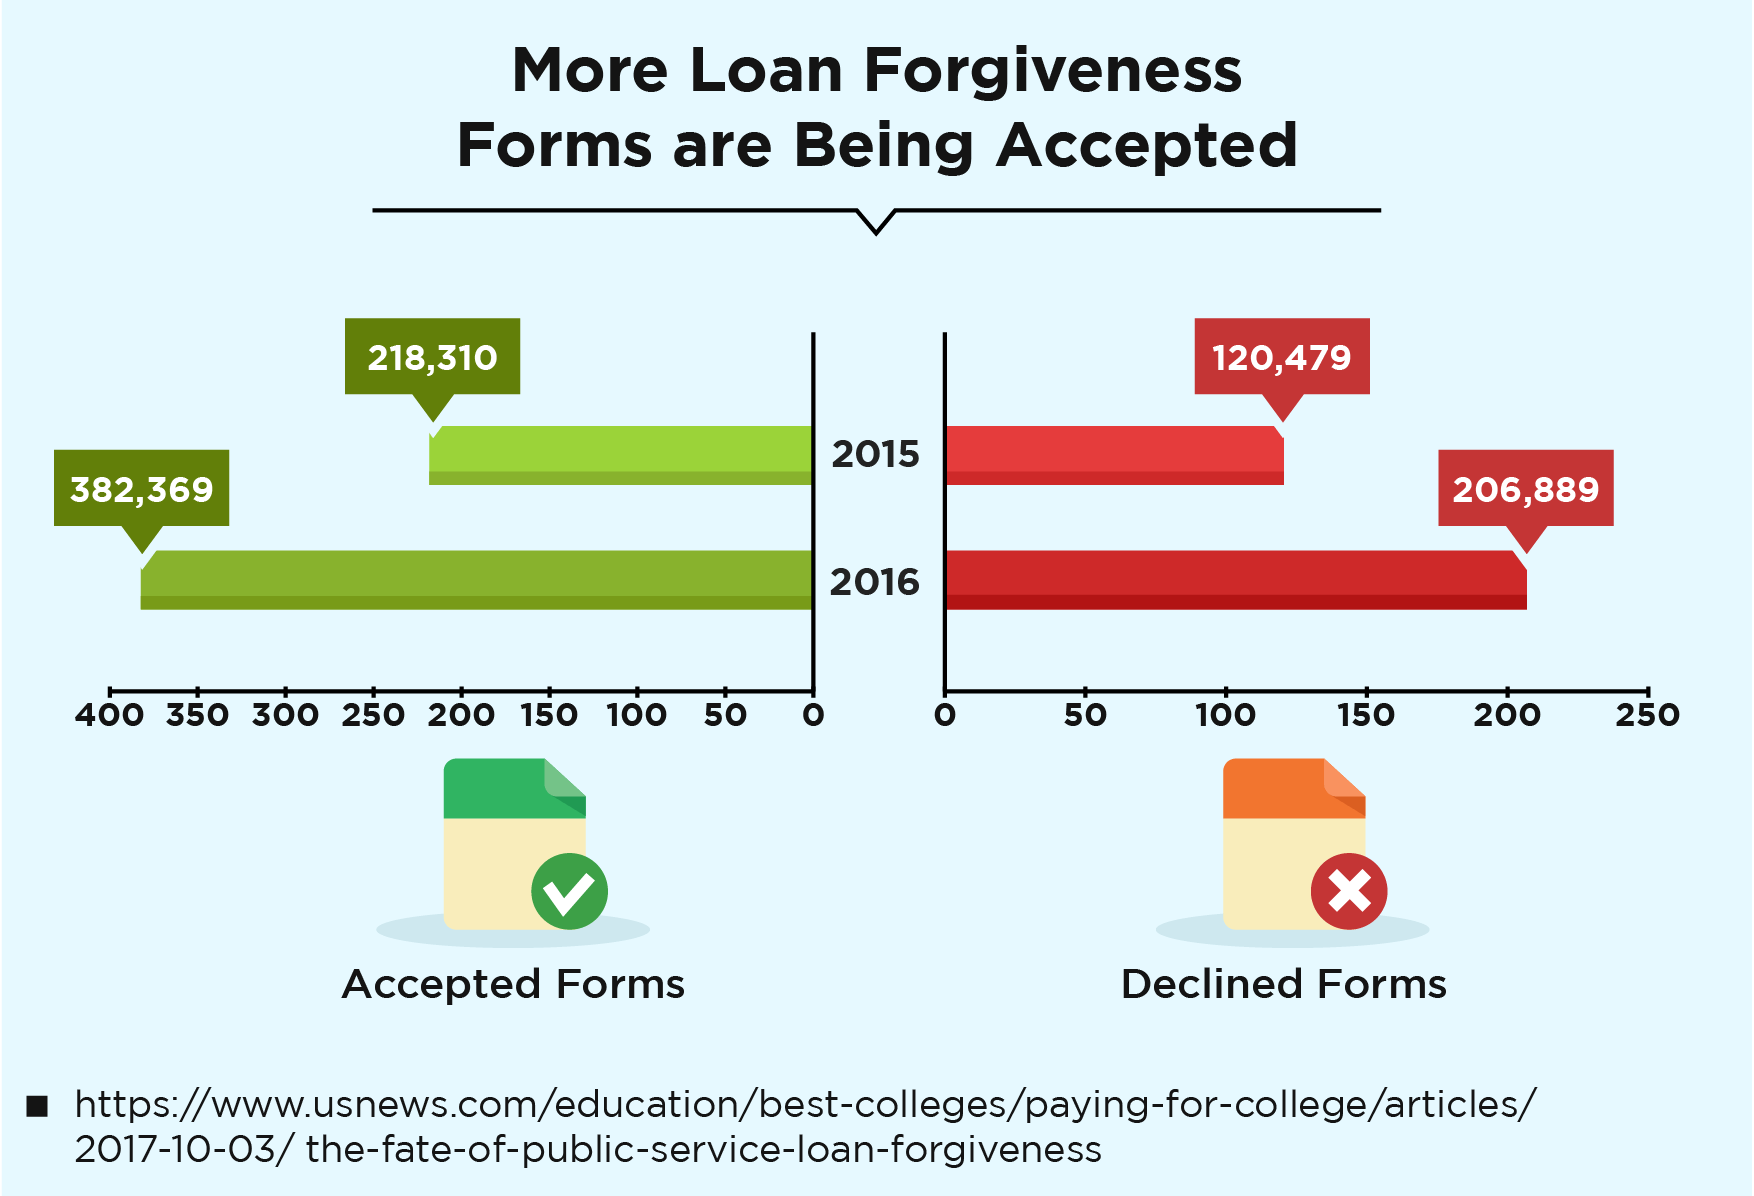 More Loan Forgiveness Forms are Being Accepted